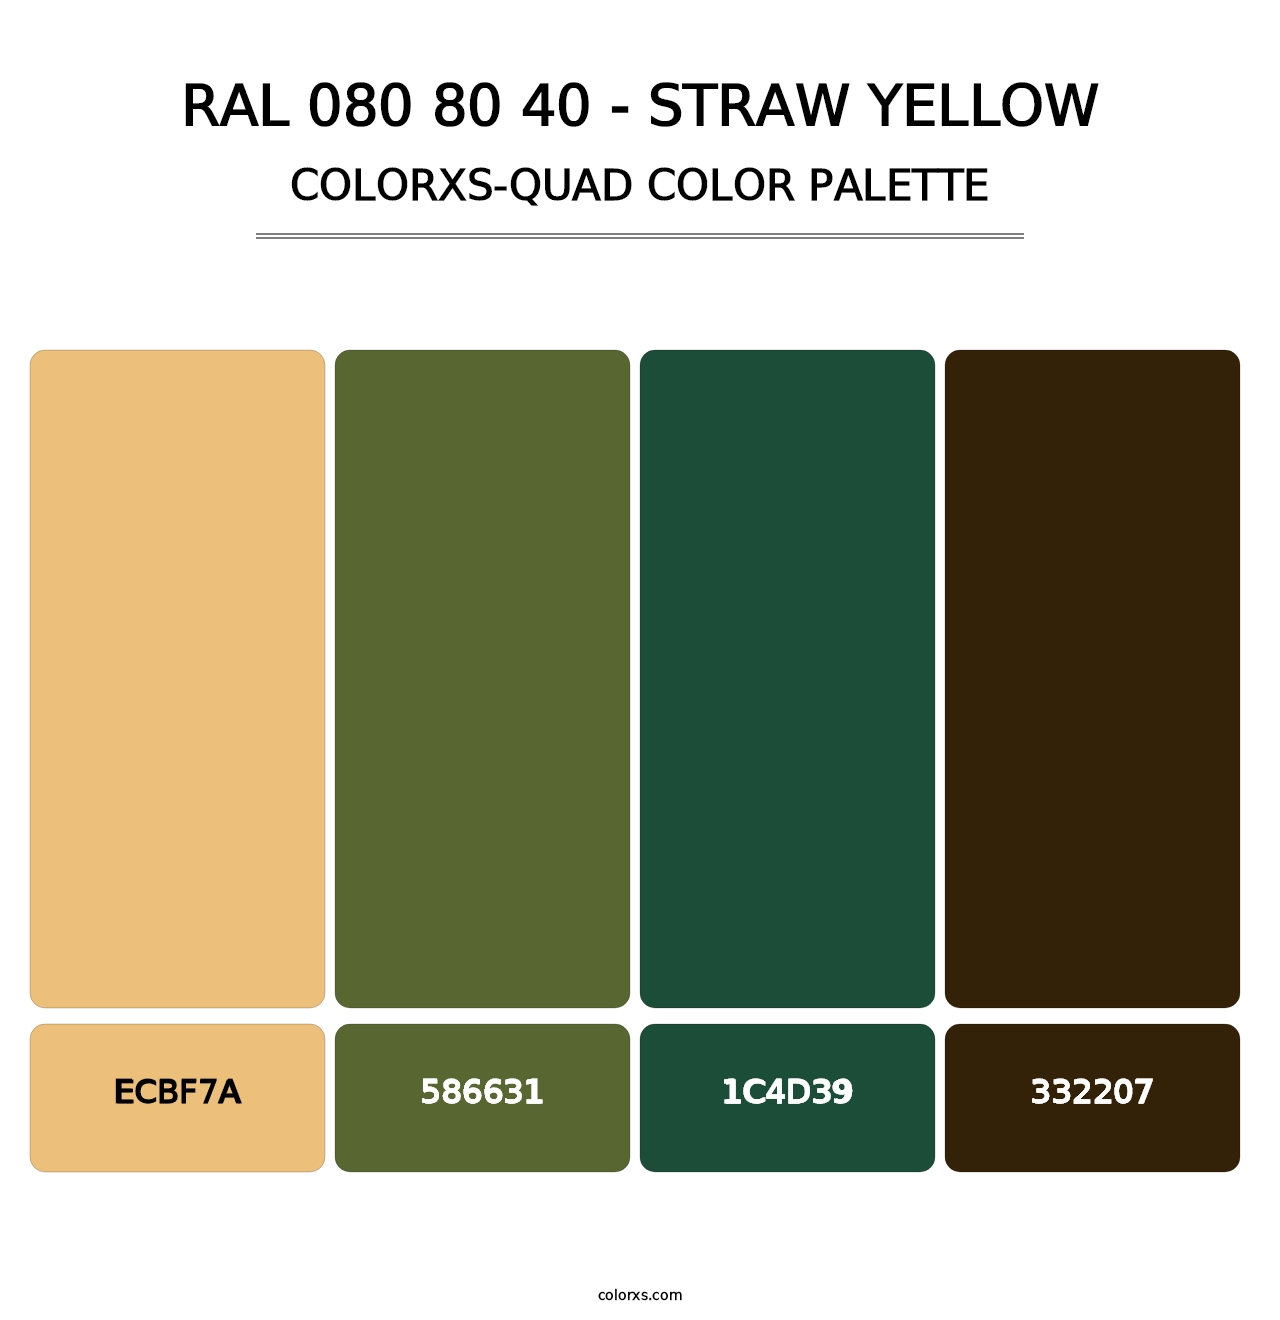 RAL 080 80 40 - Straw Yellow - Colorxs Quad Palette